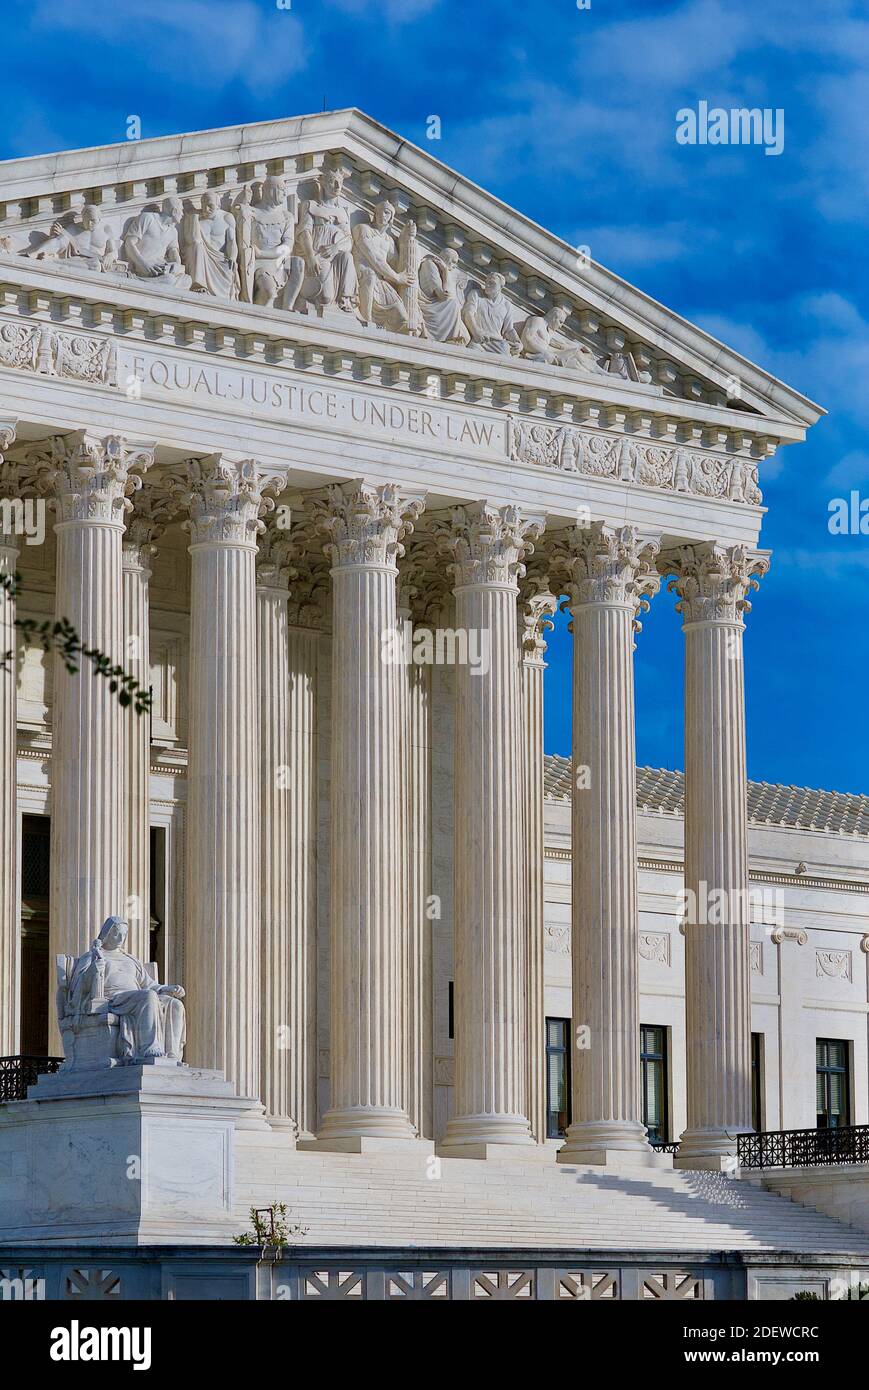 Washington, D.C. - November 3, 2020: Sunlight bathes the U.S. Supreme Court Building on Election Day for President of the United States. Stock Photo